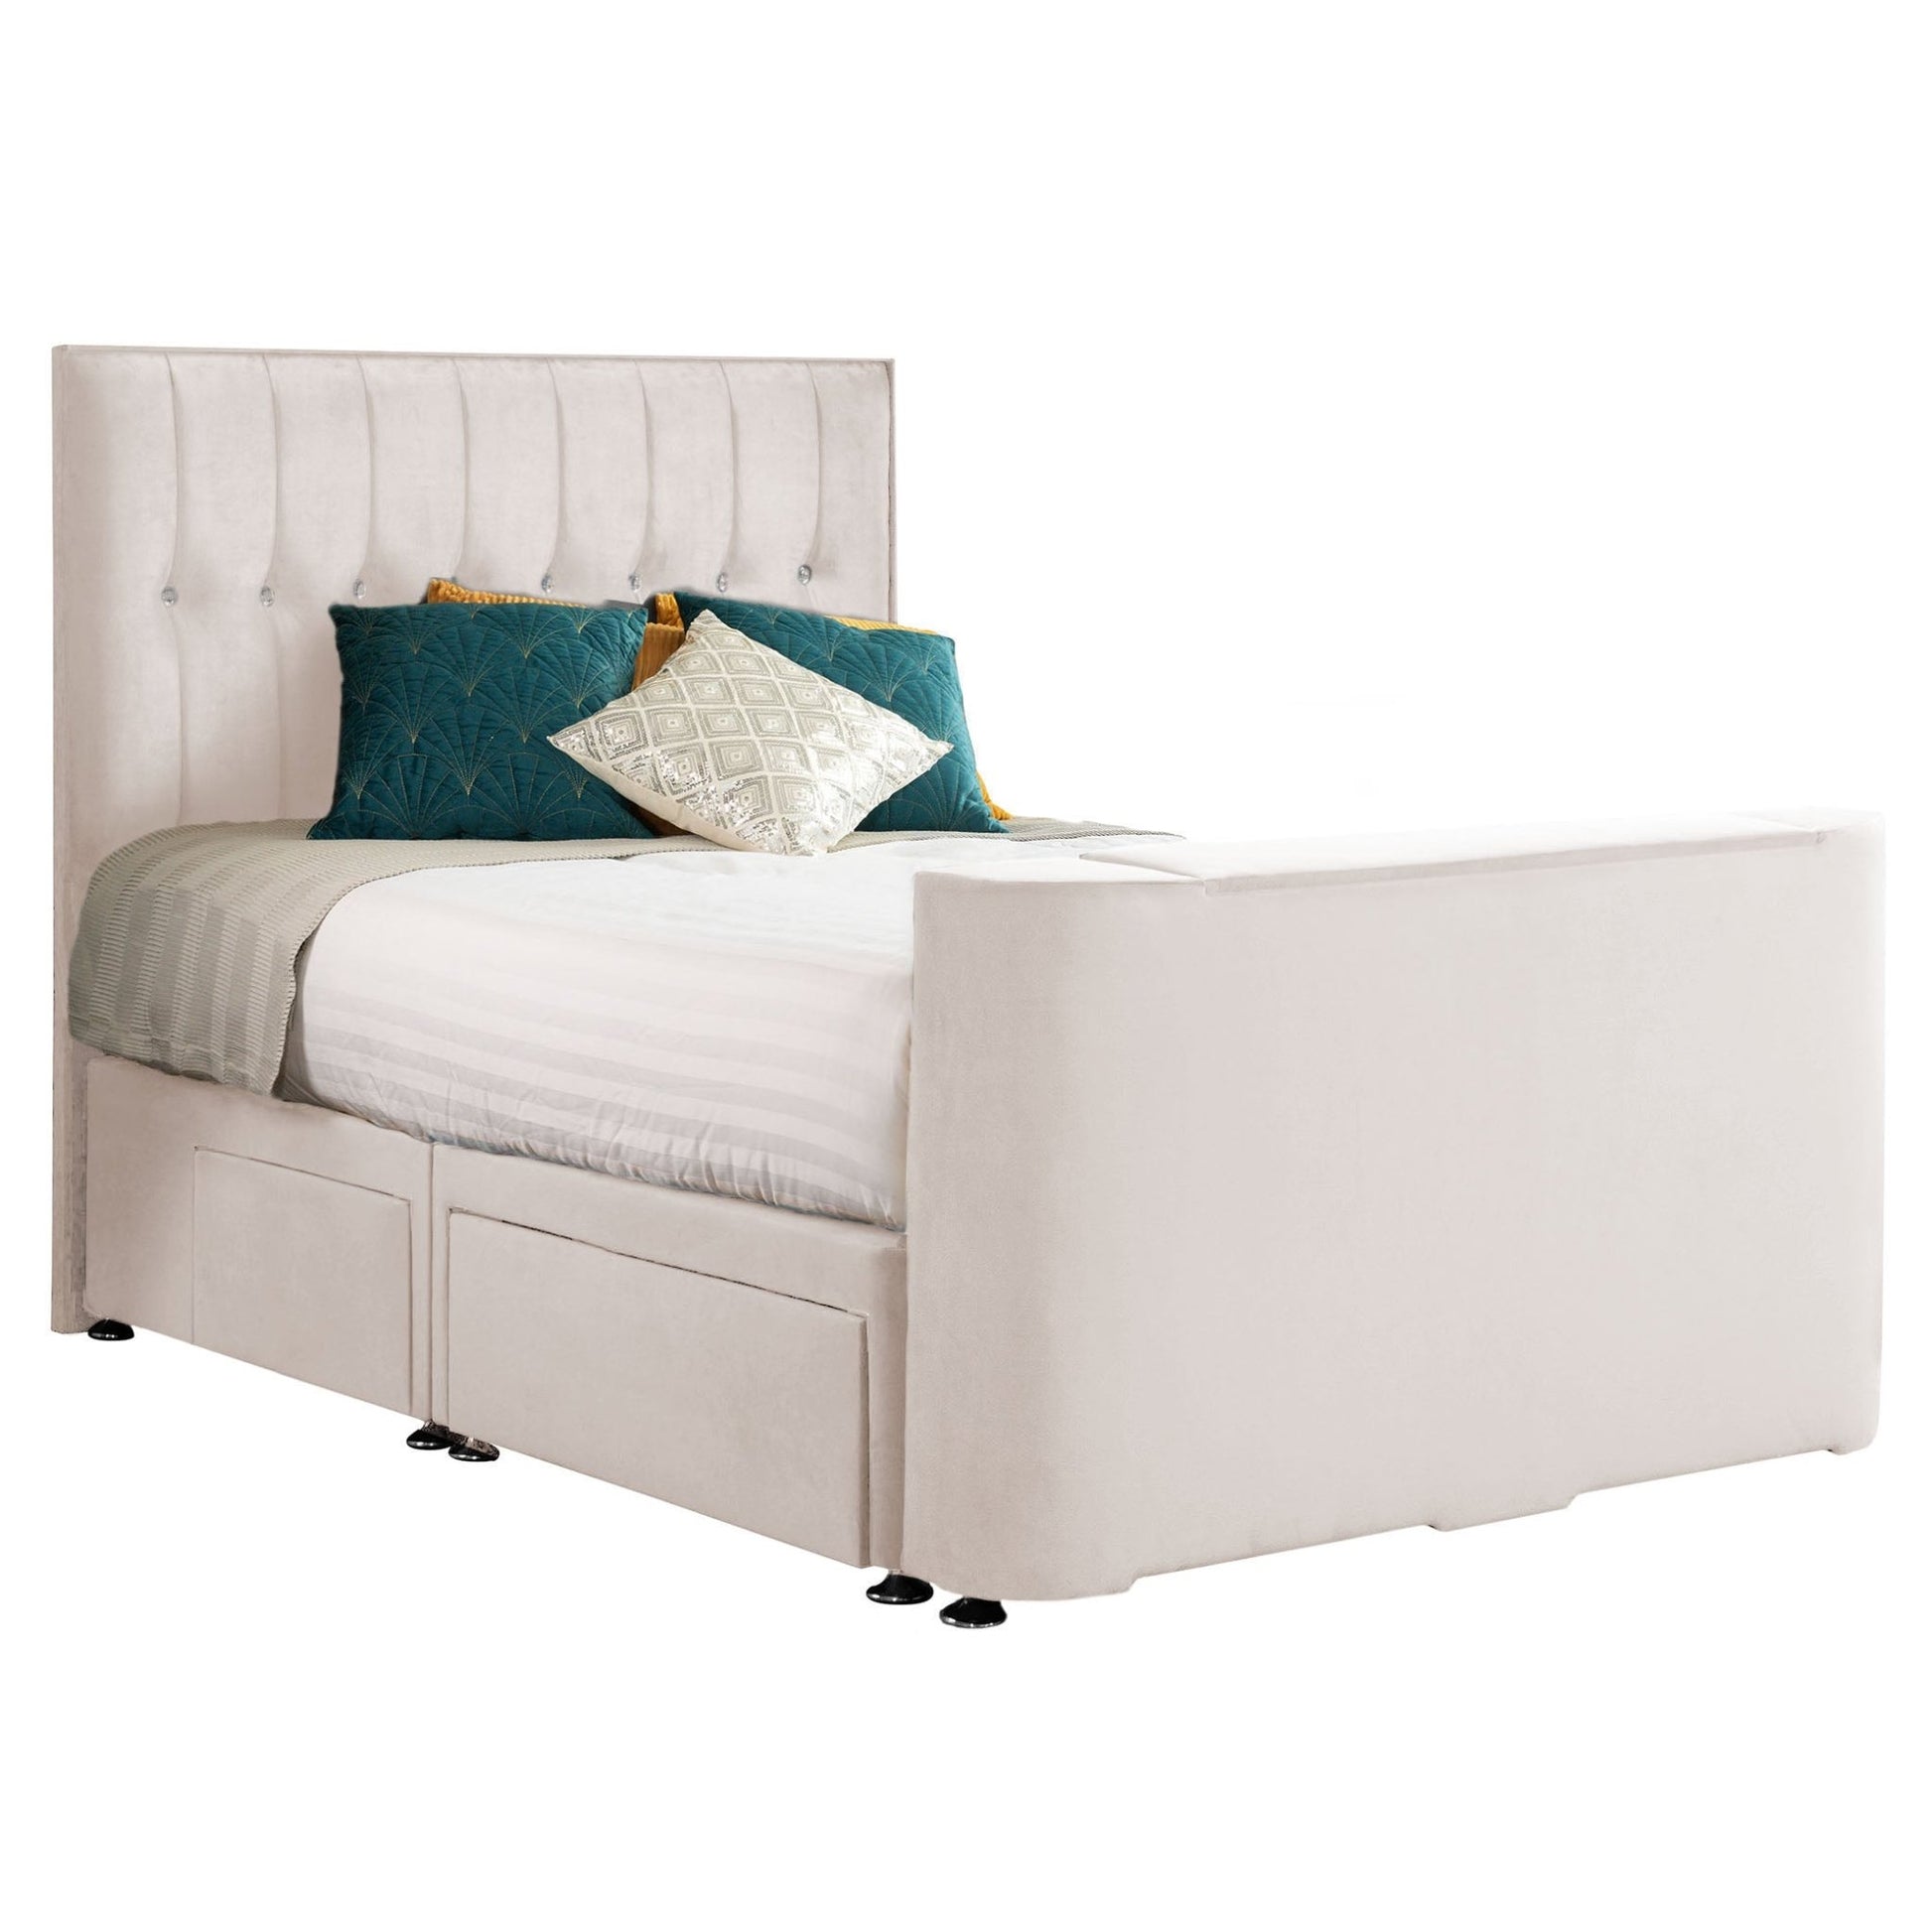 Sweet Dreams Image Sparkle TV Bed with Hybrid Storage Options - TV Beds Northwest - INIMA-SPA135PTCHATS GRANITE - choose your colour tvbed - doubletvbed